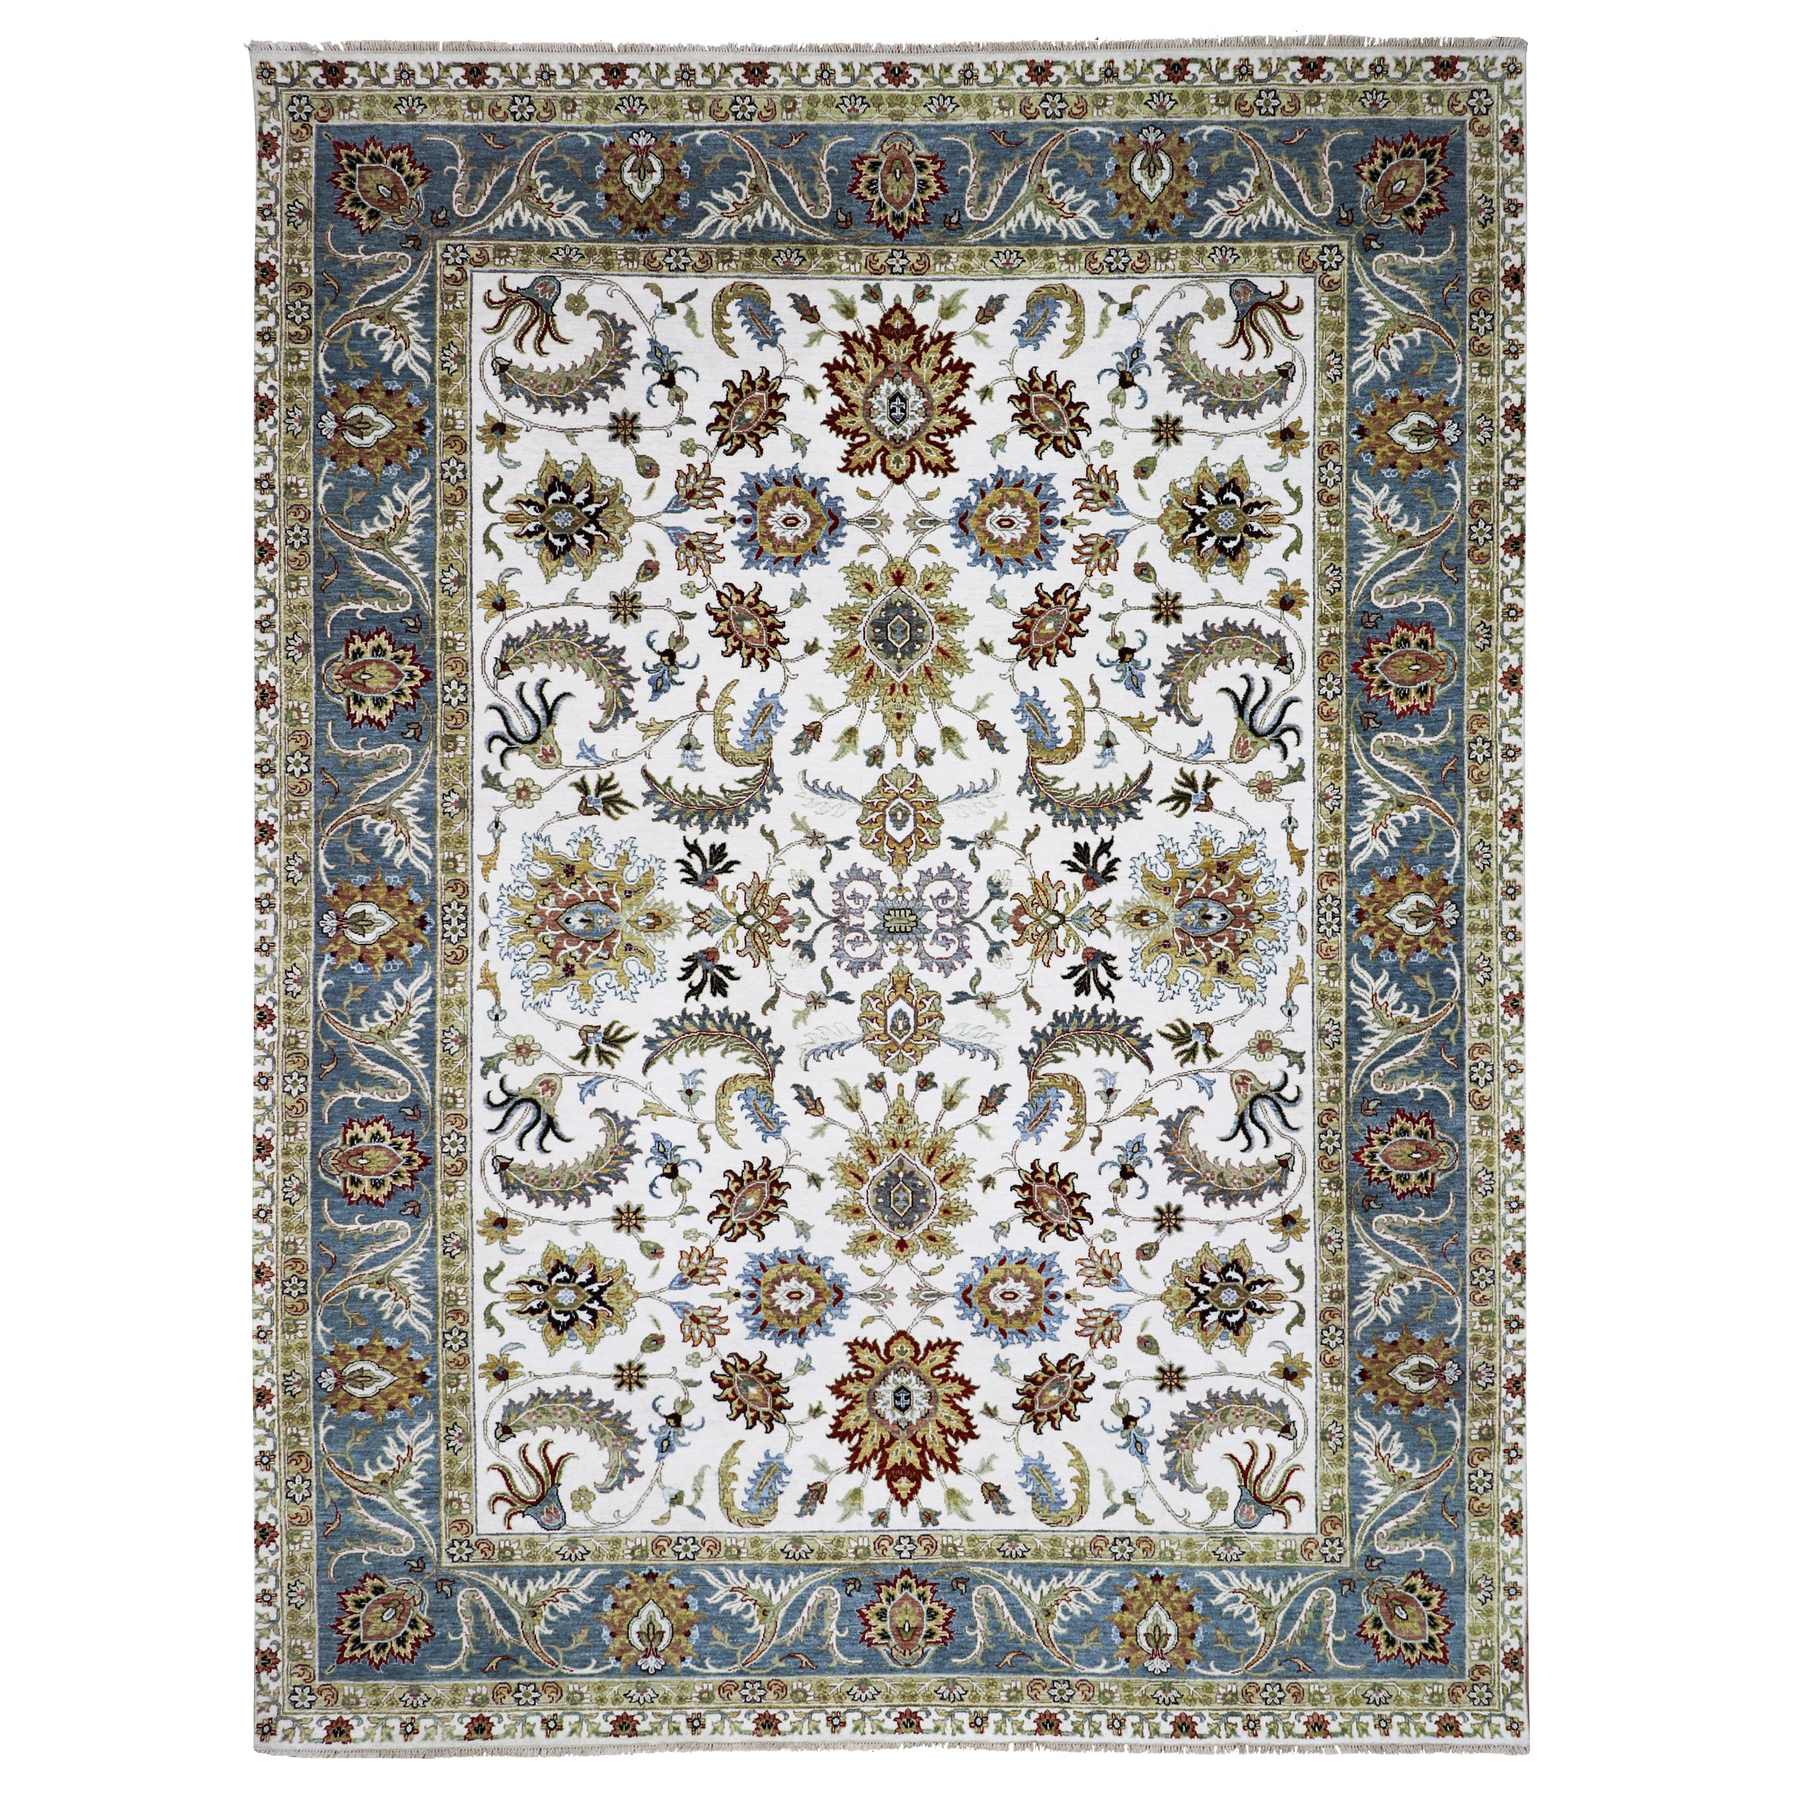 Decorators White and Azure Blue, Hand Knotted Agra Scroll and Large Leaf Design, Soft and Shiny Wool, Vegetable Dyes Oriental Rug